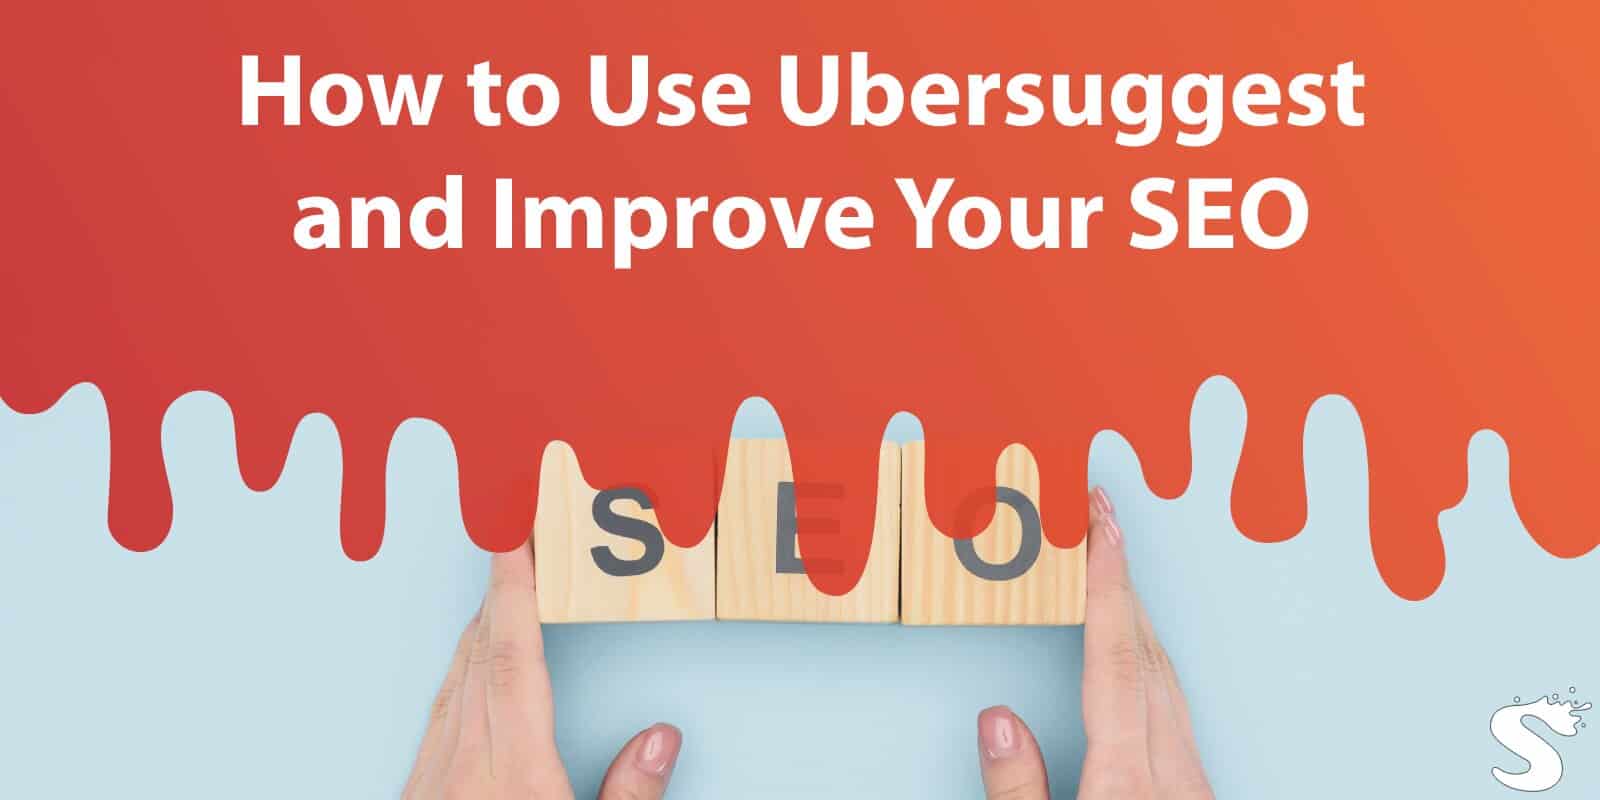 How to Use Ubersuggest and Improve Your Seo